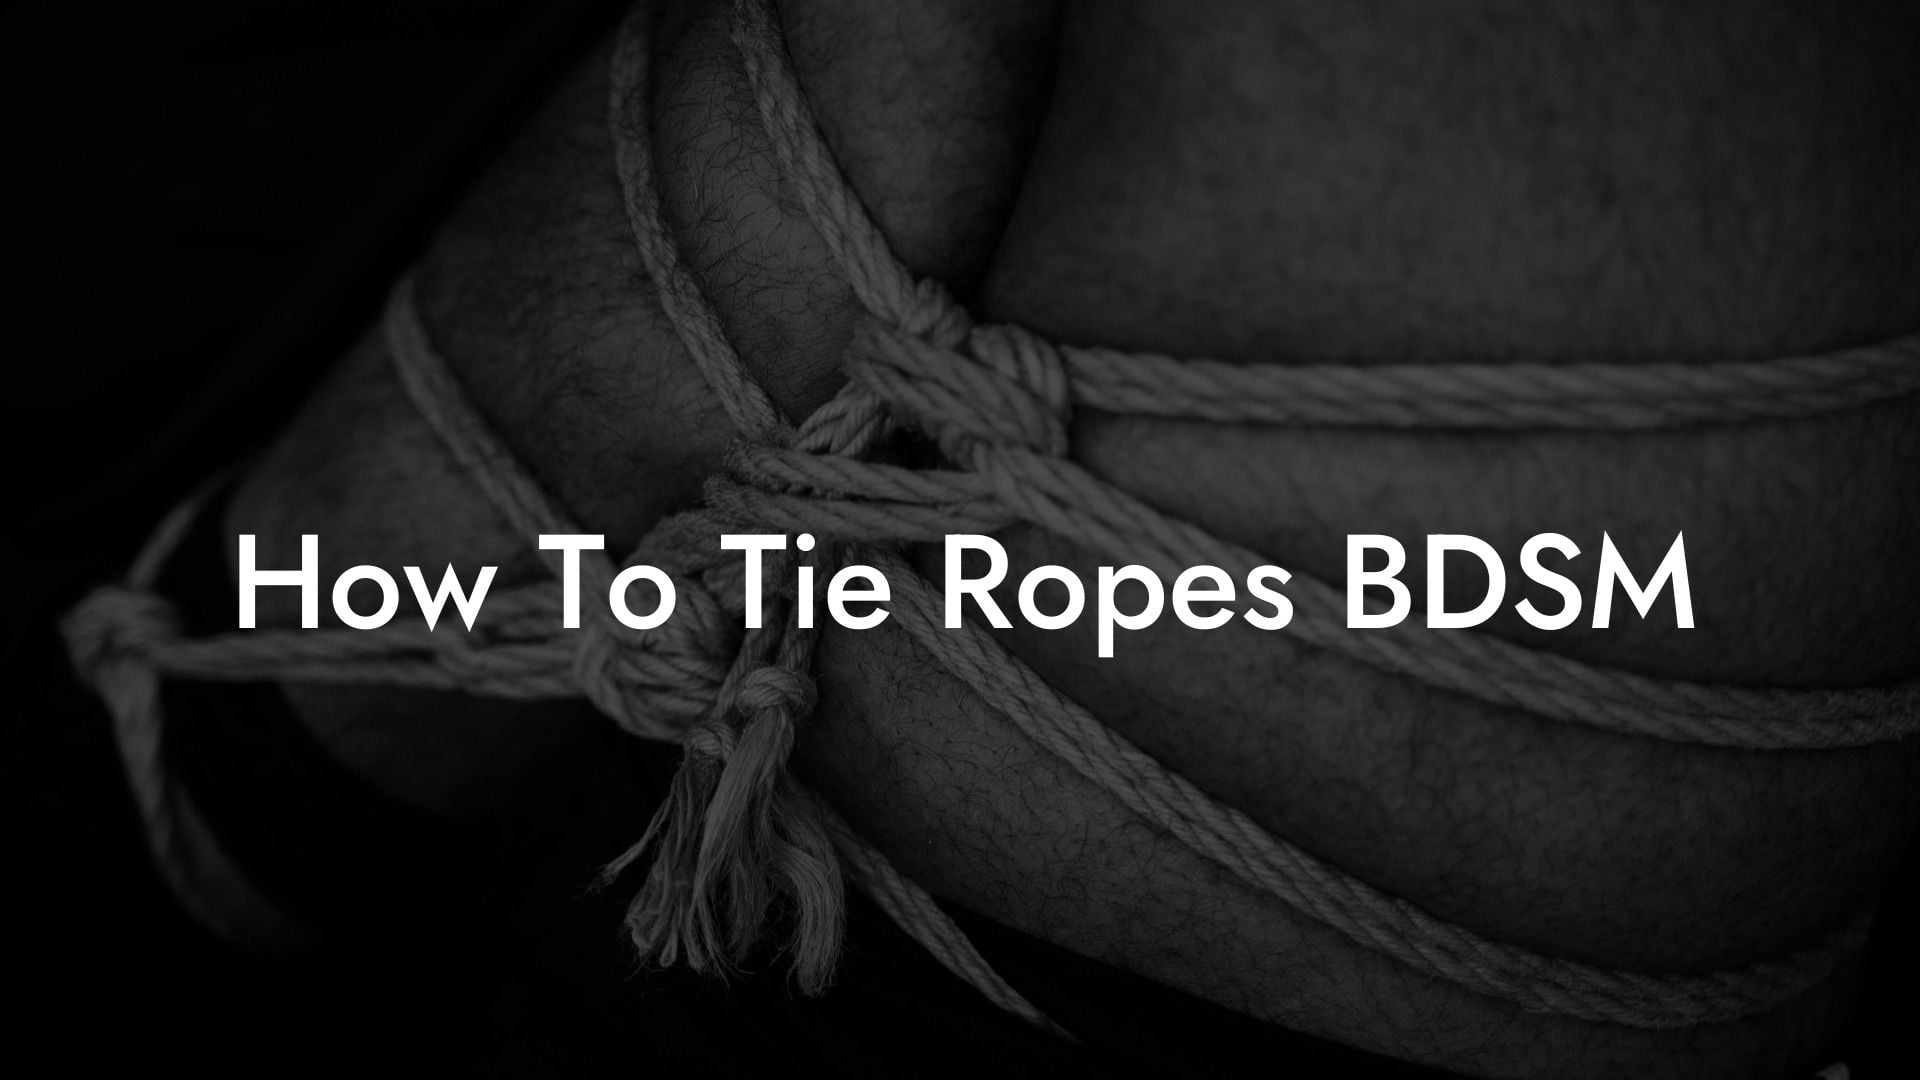 How To Tie Ropes BDSM